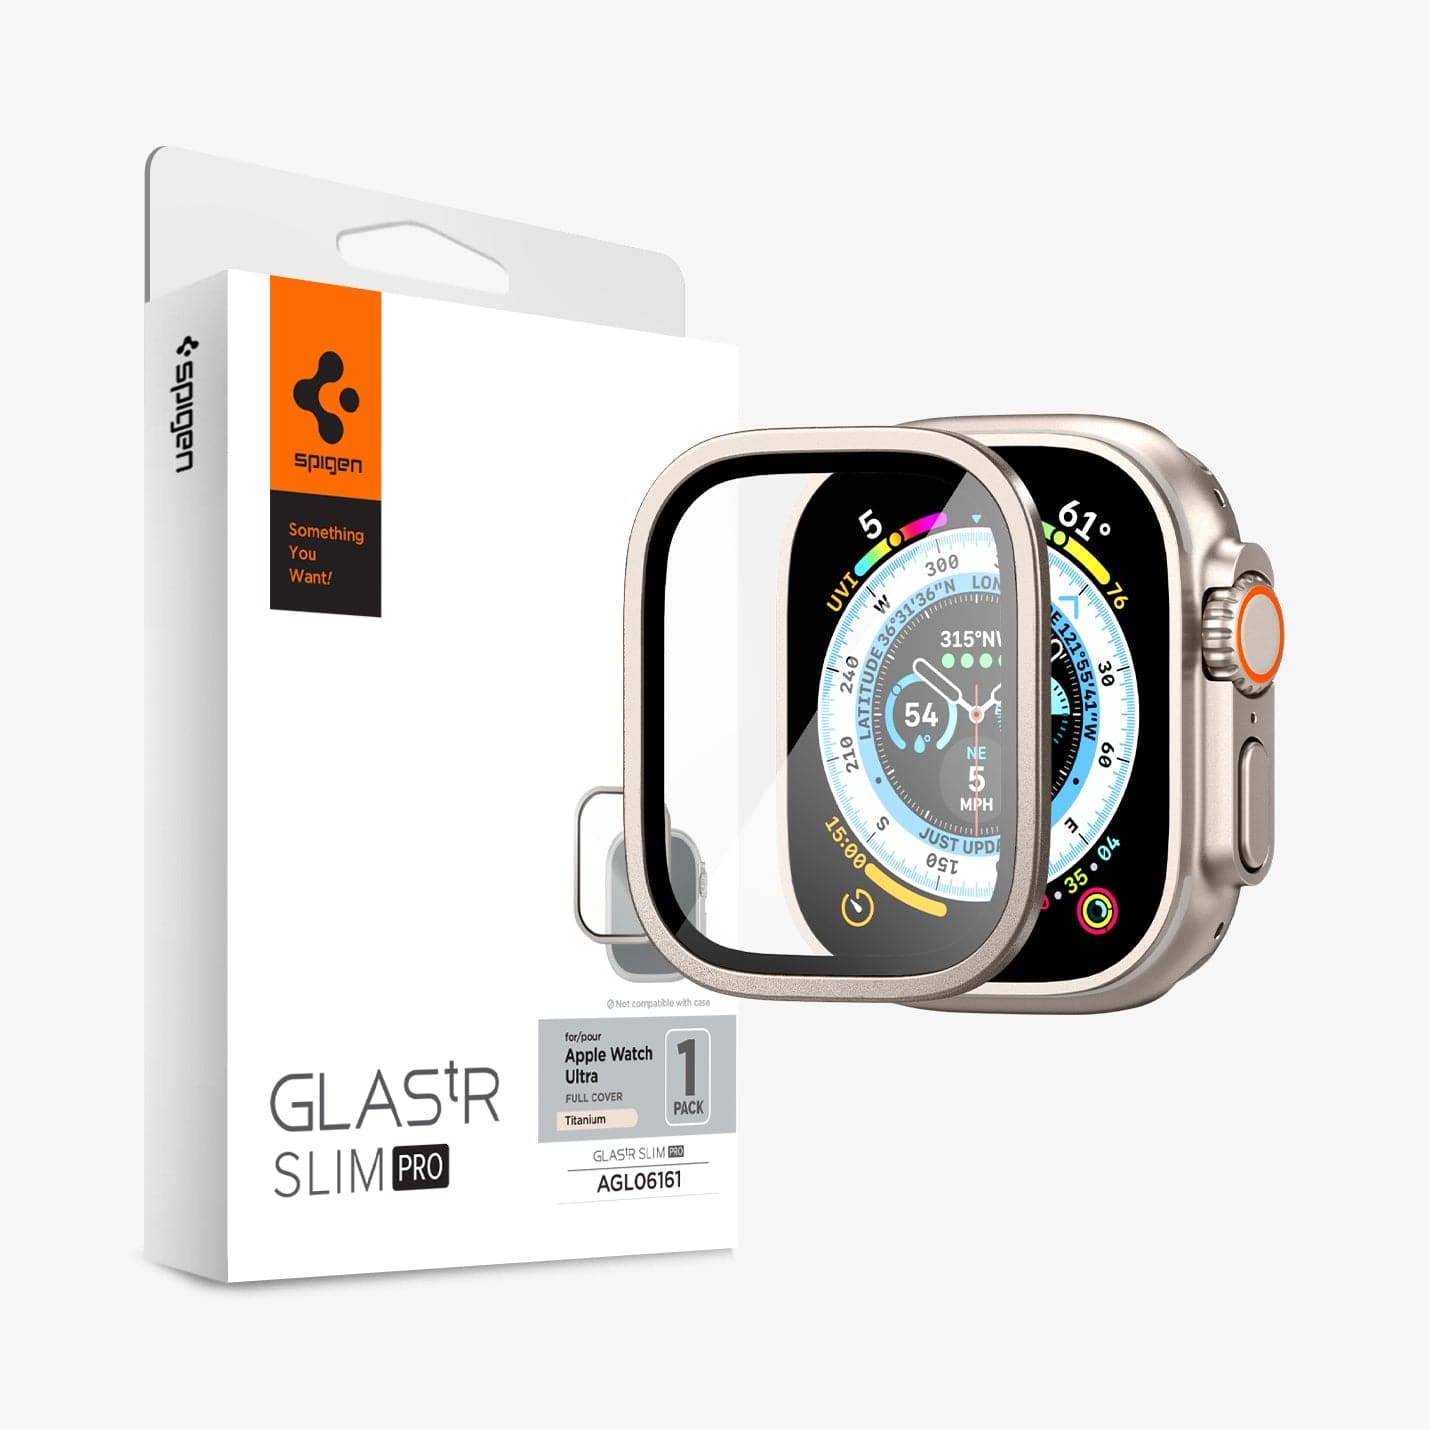 AGL06953 - Apple Watch Ultra (Apple Watch (49mm)) Screen Protector Glas.tR Slim Pro in titanium showing the screen protector, watch face and packaging